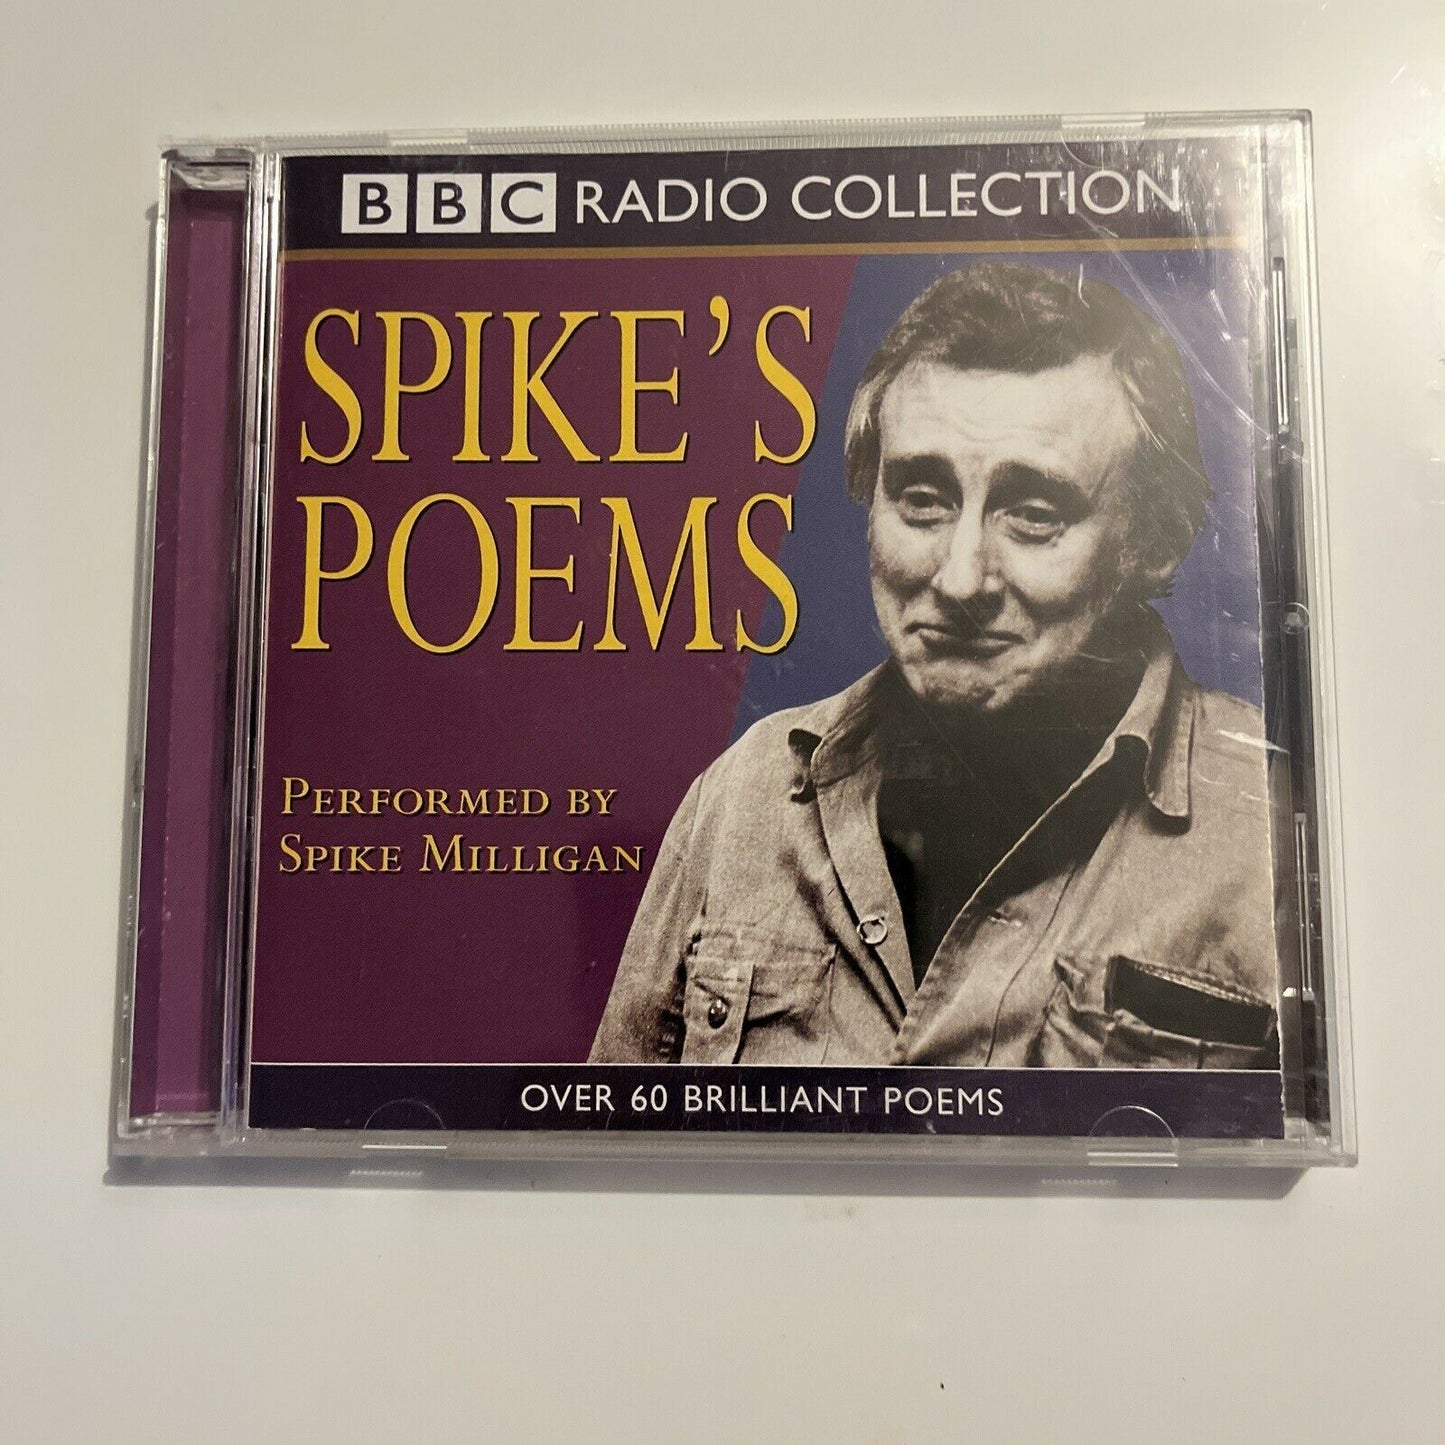 SPIKE MILLIGAN - Spike's Poems (CD, 2002) BBC Radio Collection